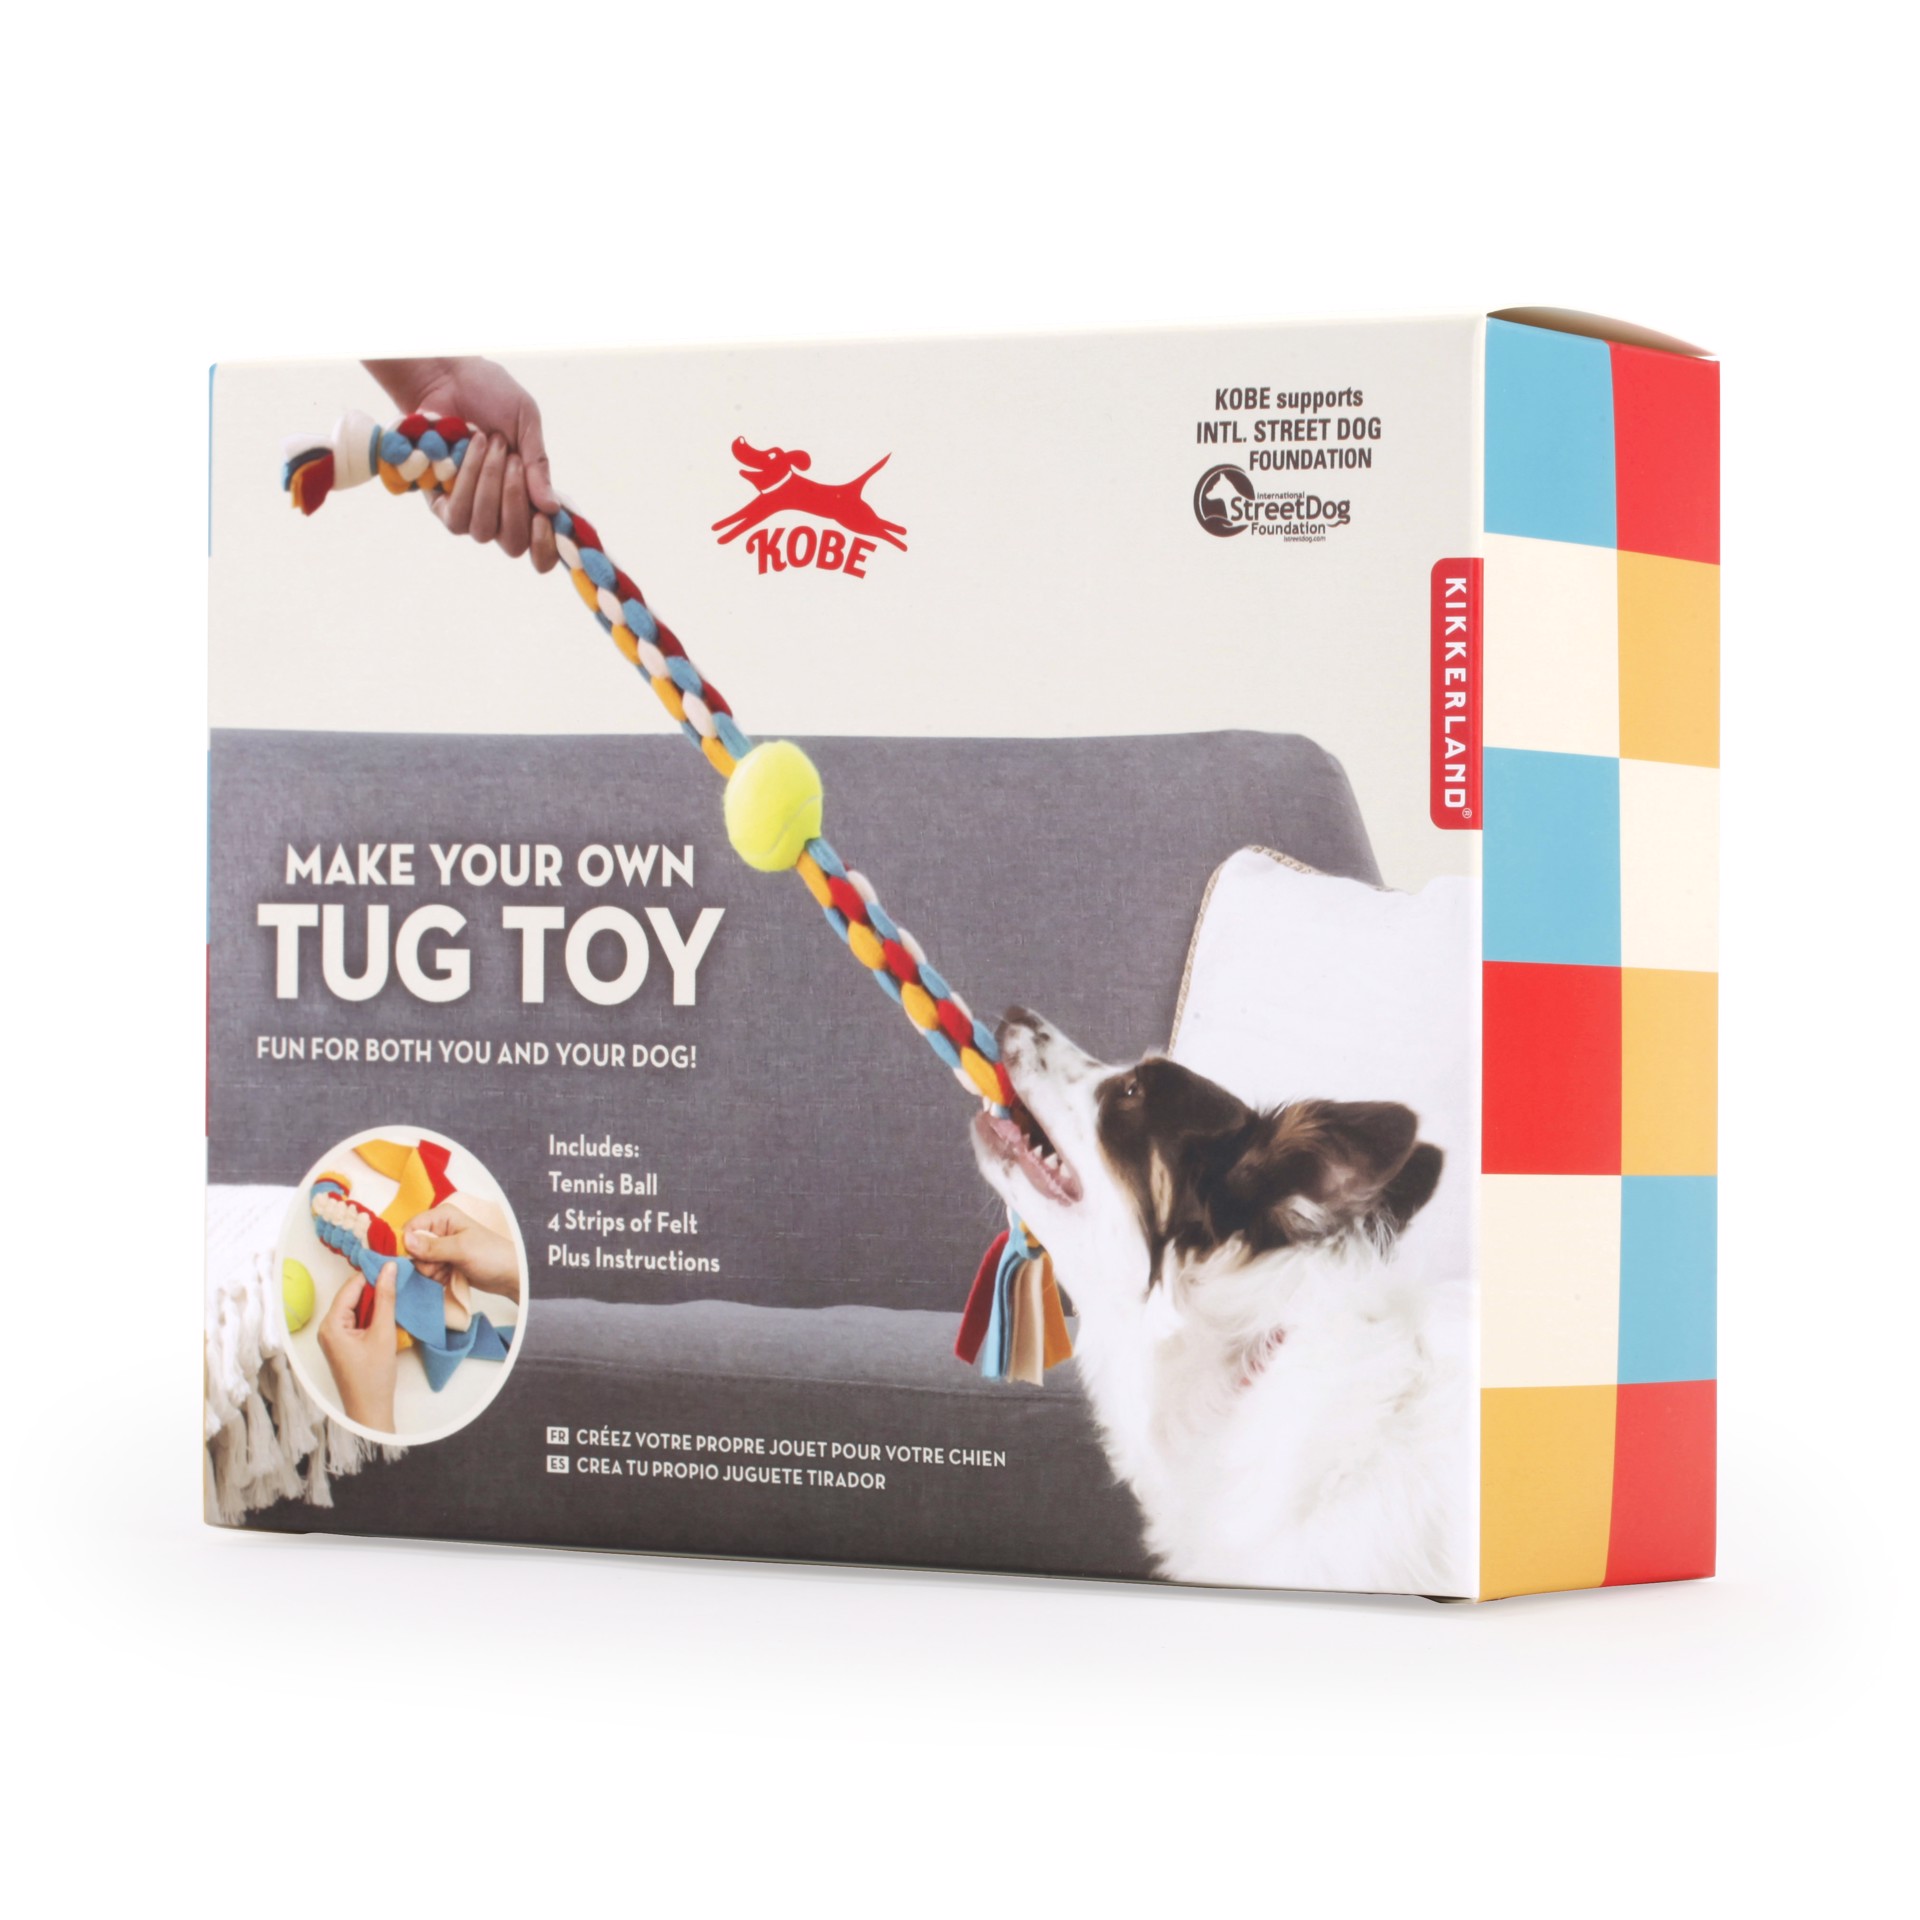 Make Your Own Tug Toy by Chauvet Arts